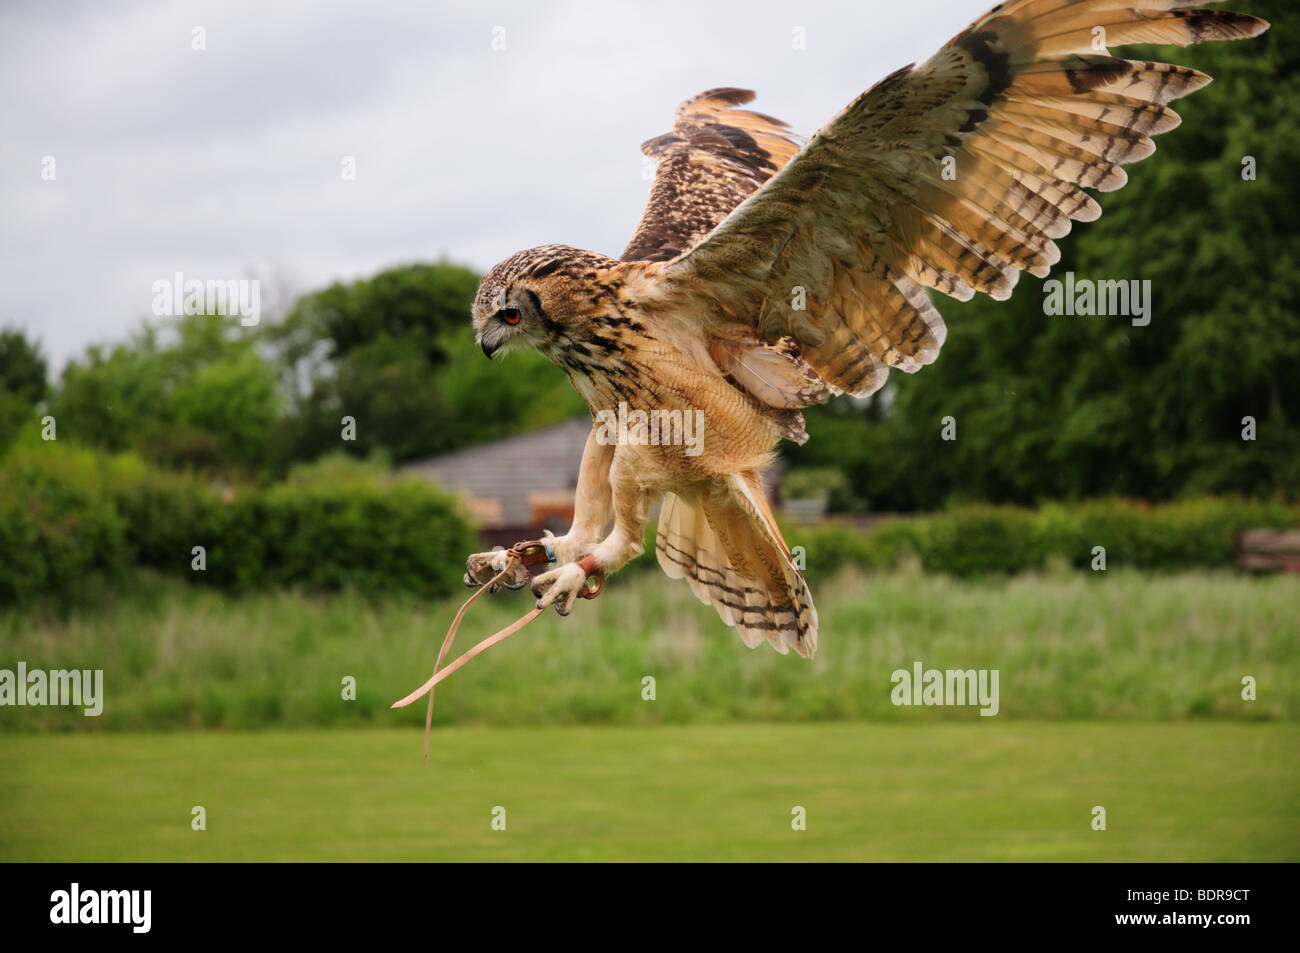 Eagle Owl Swooping Stock Photo